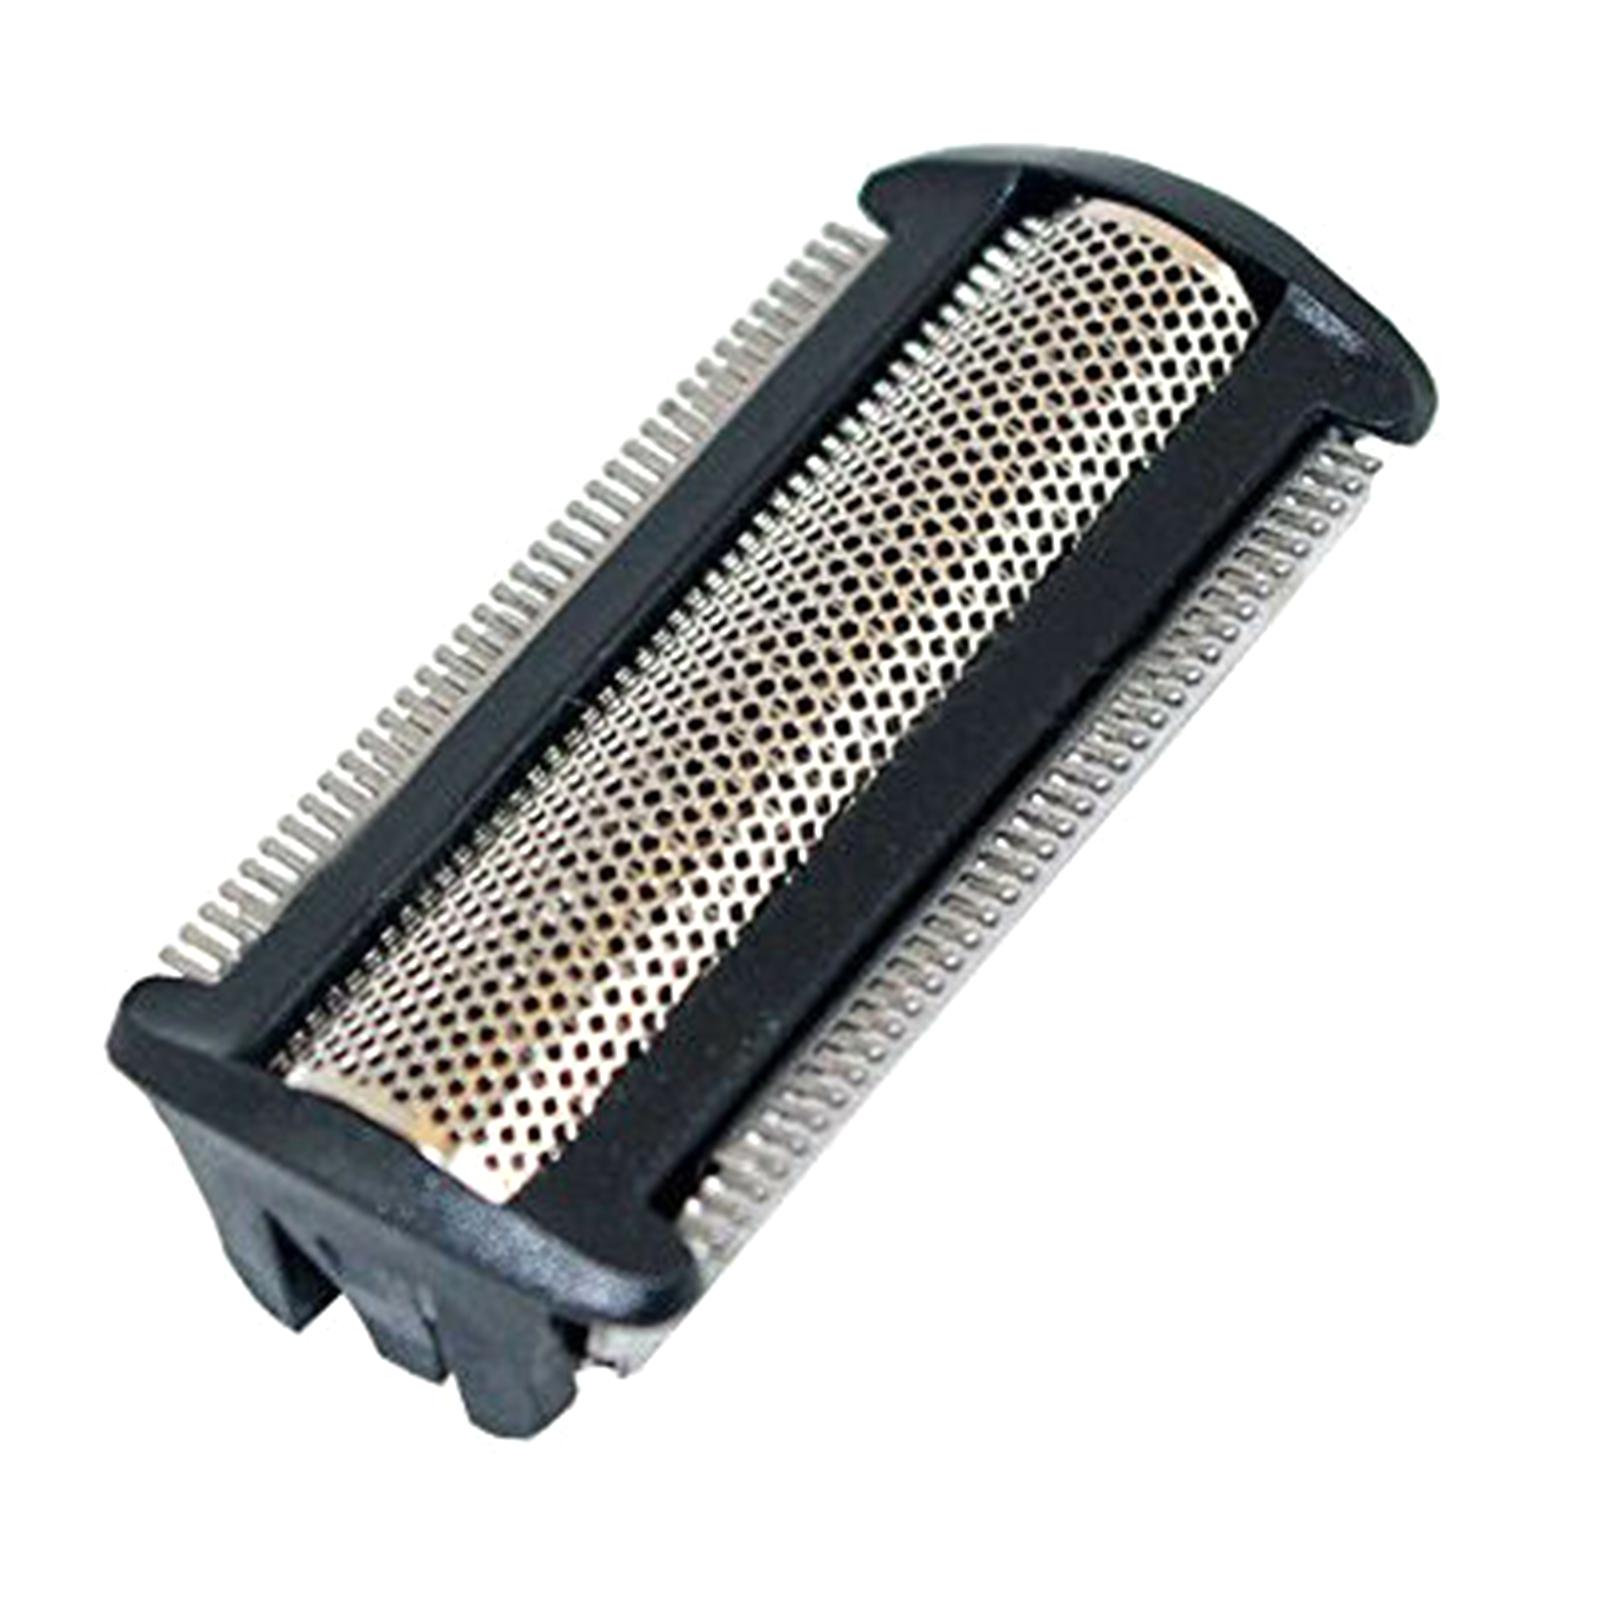 KeepHealthy Trimmer Shavers Replacement Head/Shaver Foil Replacement for PHILIPS NO-RELCO BODYGROOM BG2024